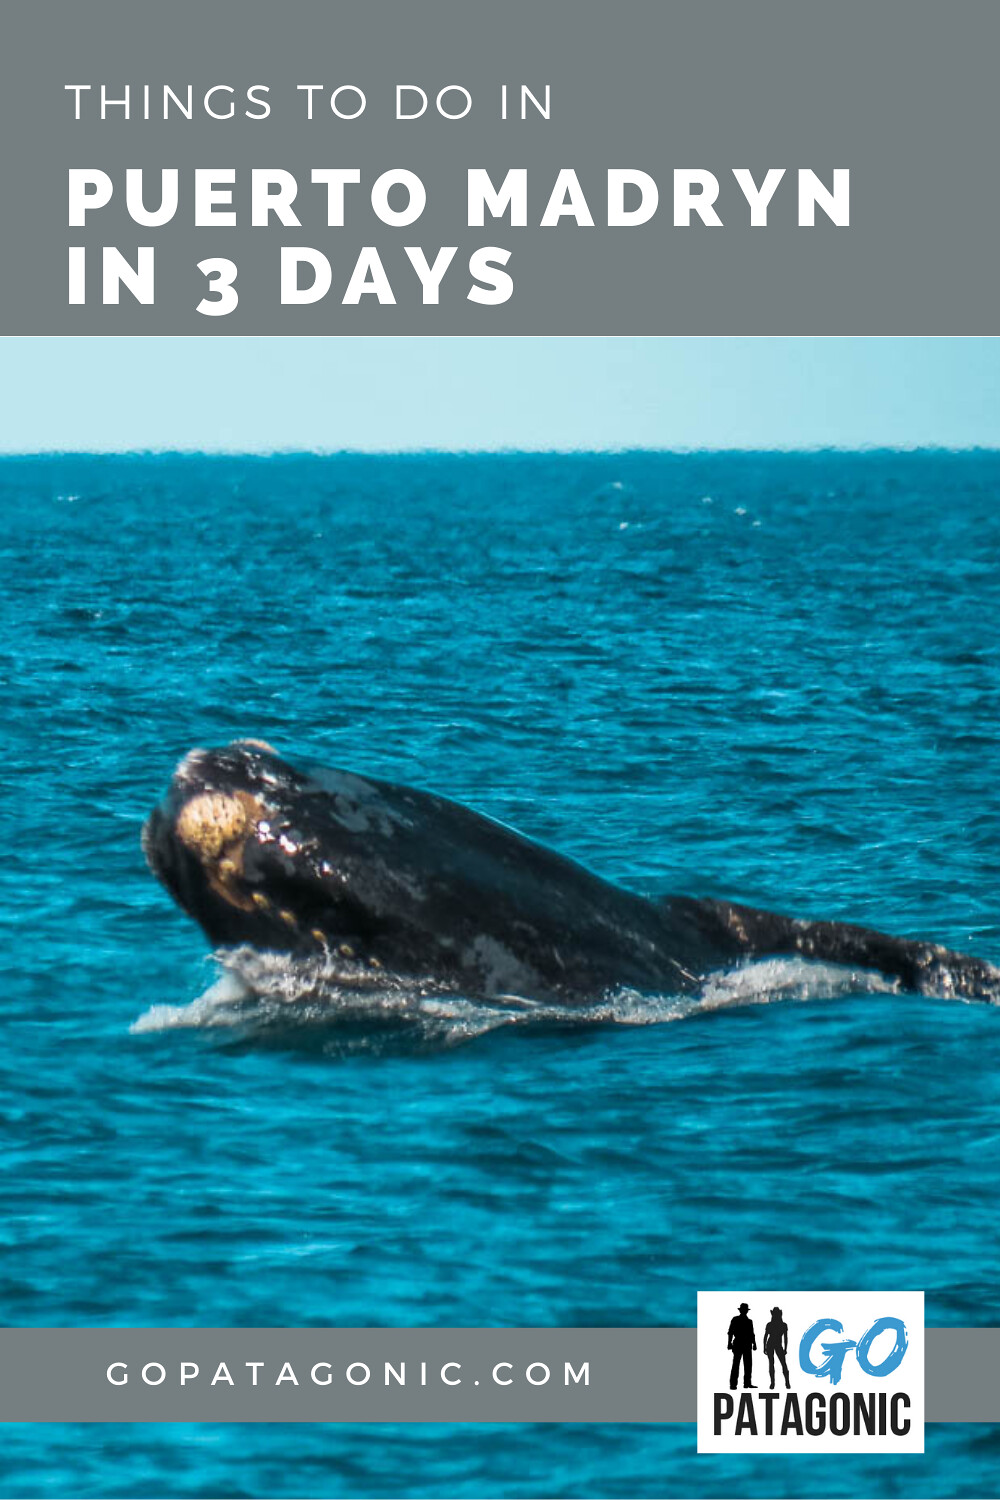 Puerto Madryn in 3 days – suggested itinerary